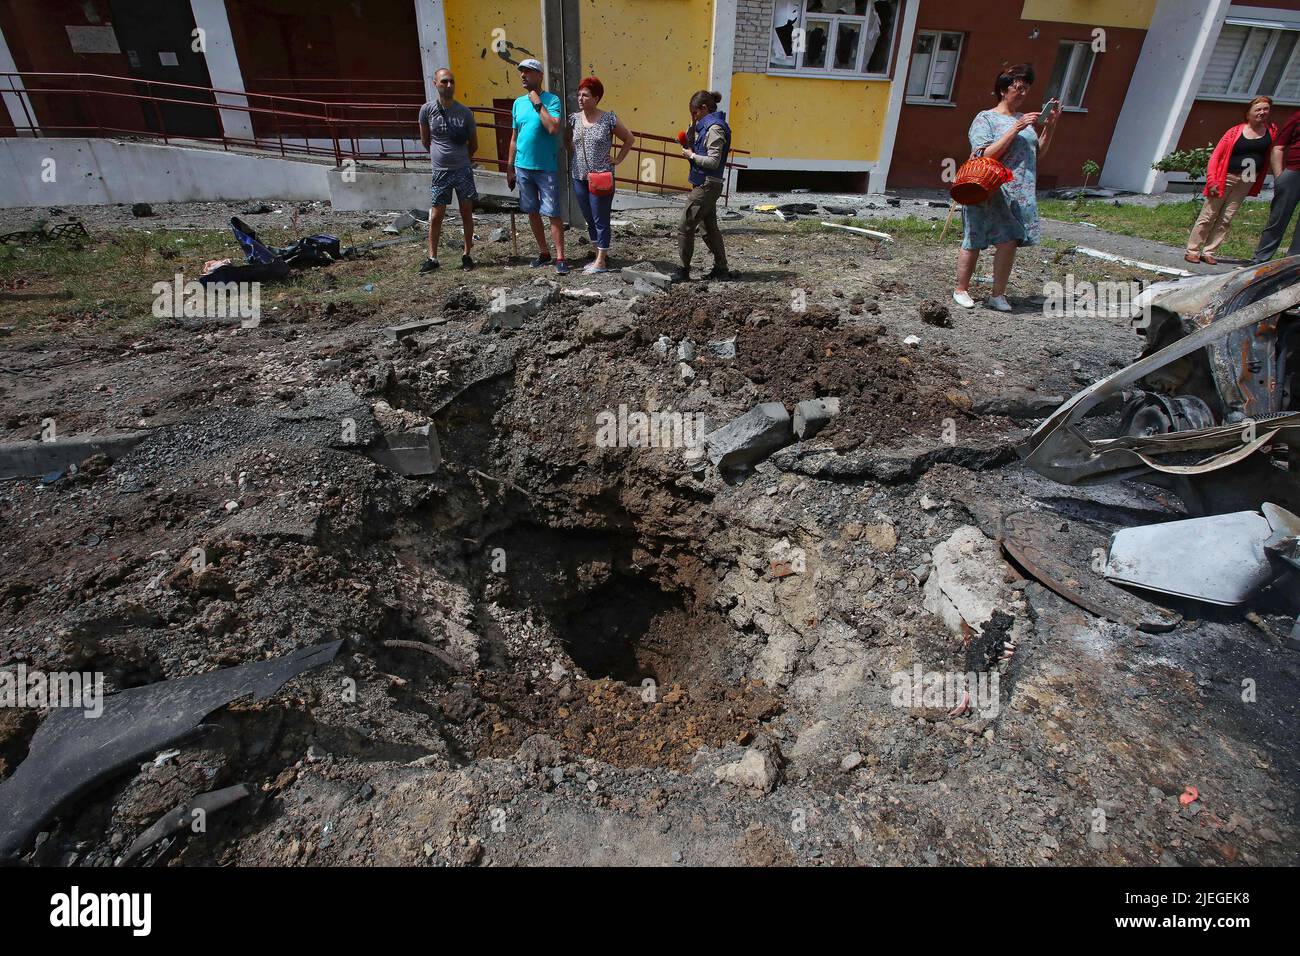 A crater is seen in the ground in the yard of an apartment block after the Russian troops shelled a northern neighbourhood with a BM-30 Smerch multiple rocket launcher, Kharkiv, northeastern Ukraine, June 26, 2022. Photo by Vyacheslav Madiyevskyy/Ukrinform/ABACAPRESS.COM Stock Photo